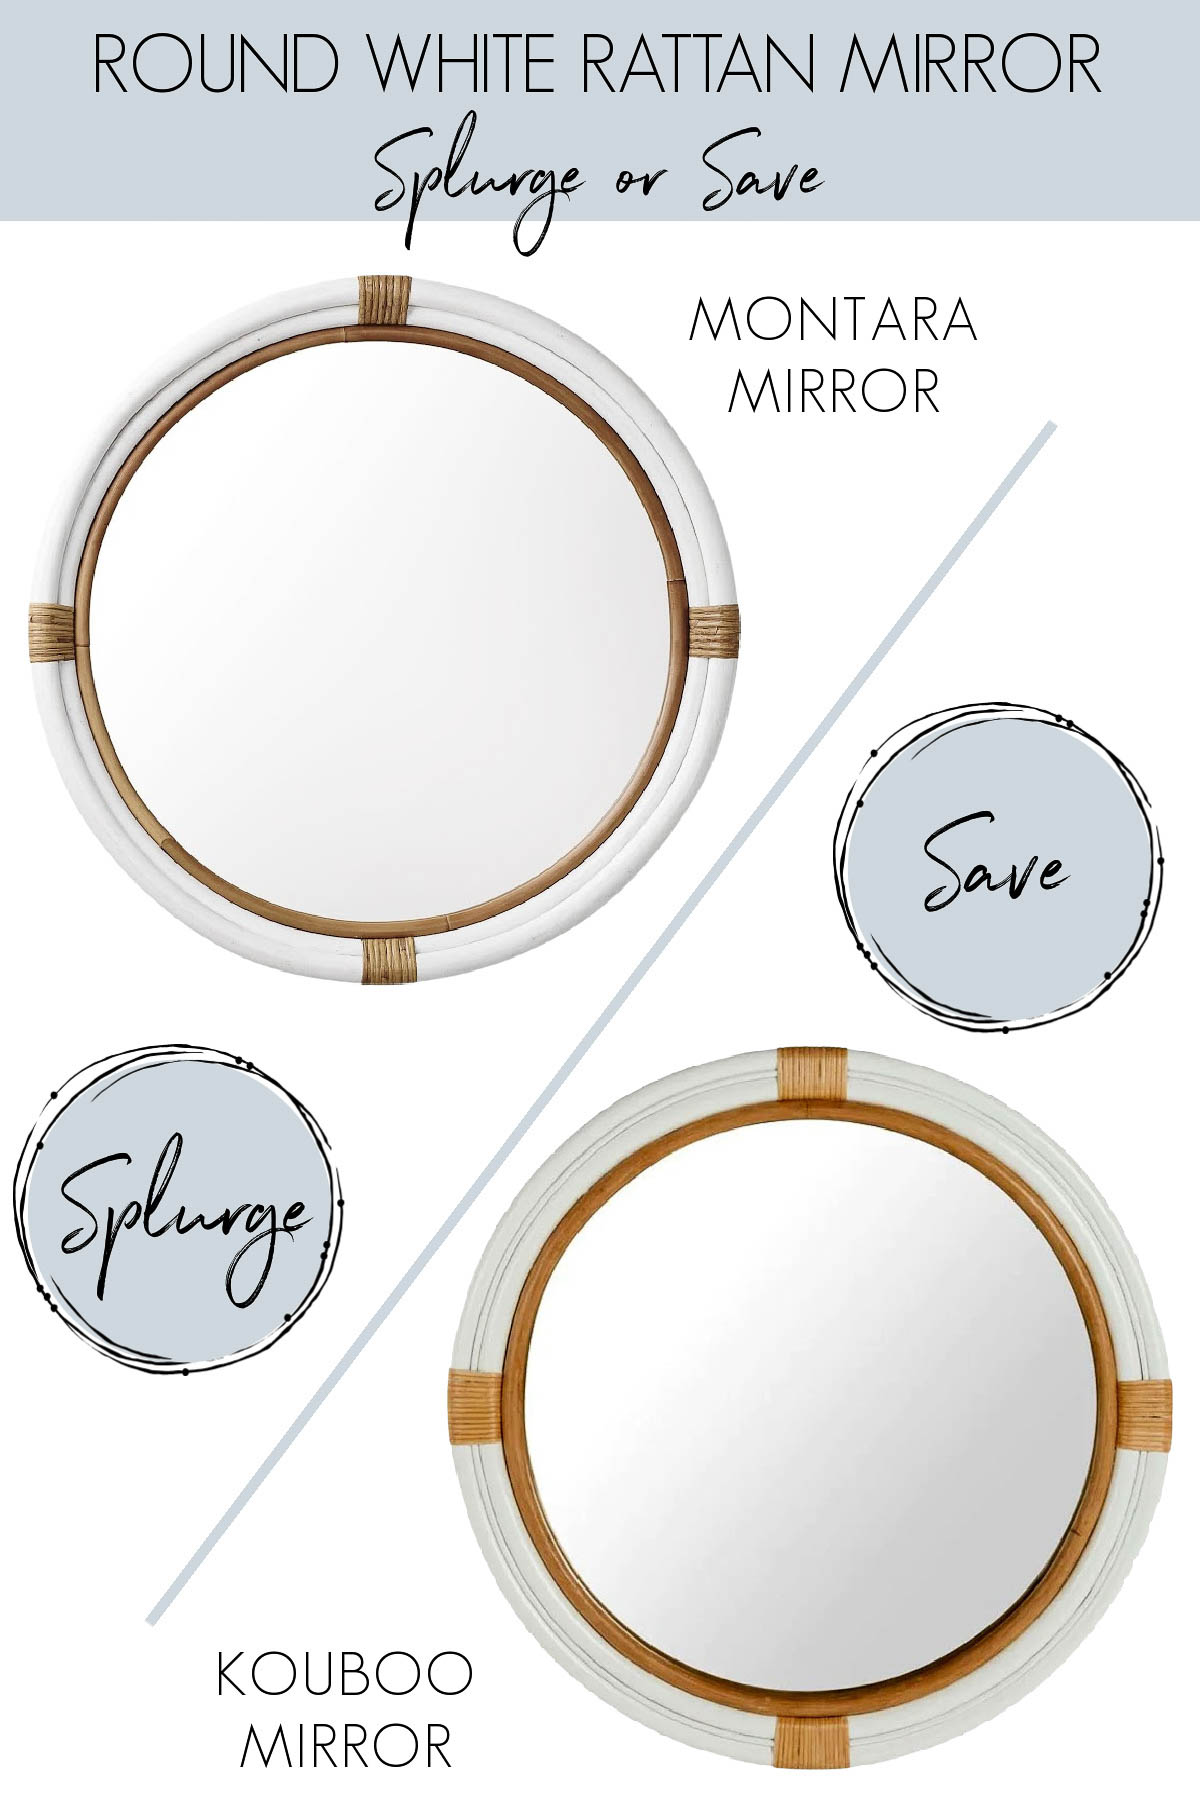 Two round white rattan mirrors - an expensive splurge version and a less expensive save version